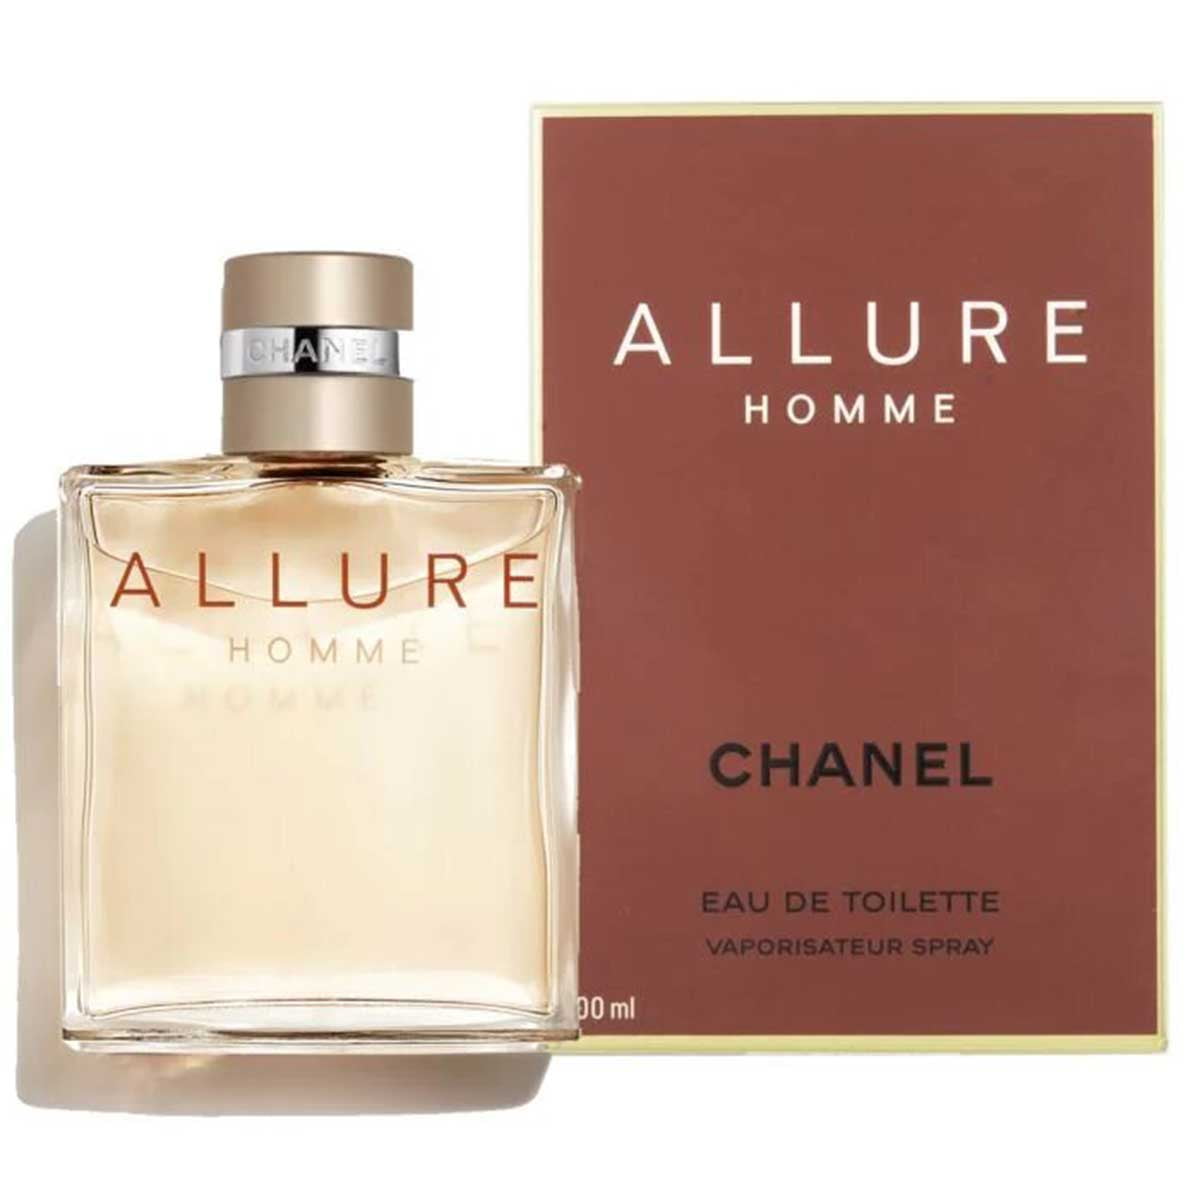 CHANEL Allure Homme EDT Spray 5.0 oz (150 ml) (m) : Beauty & Personal Care  